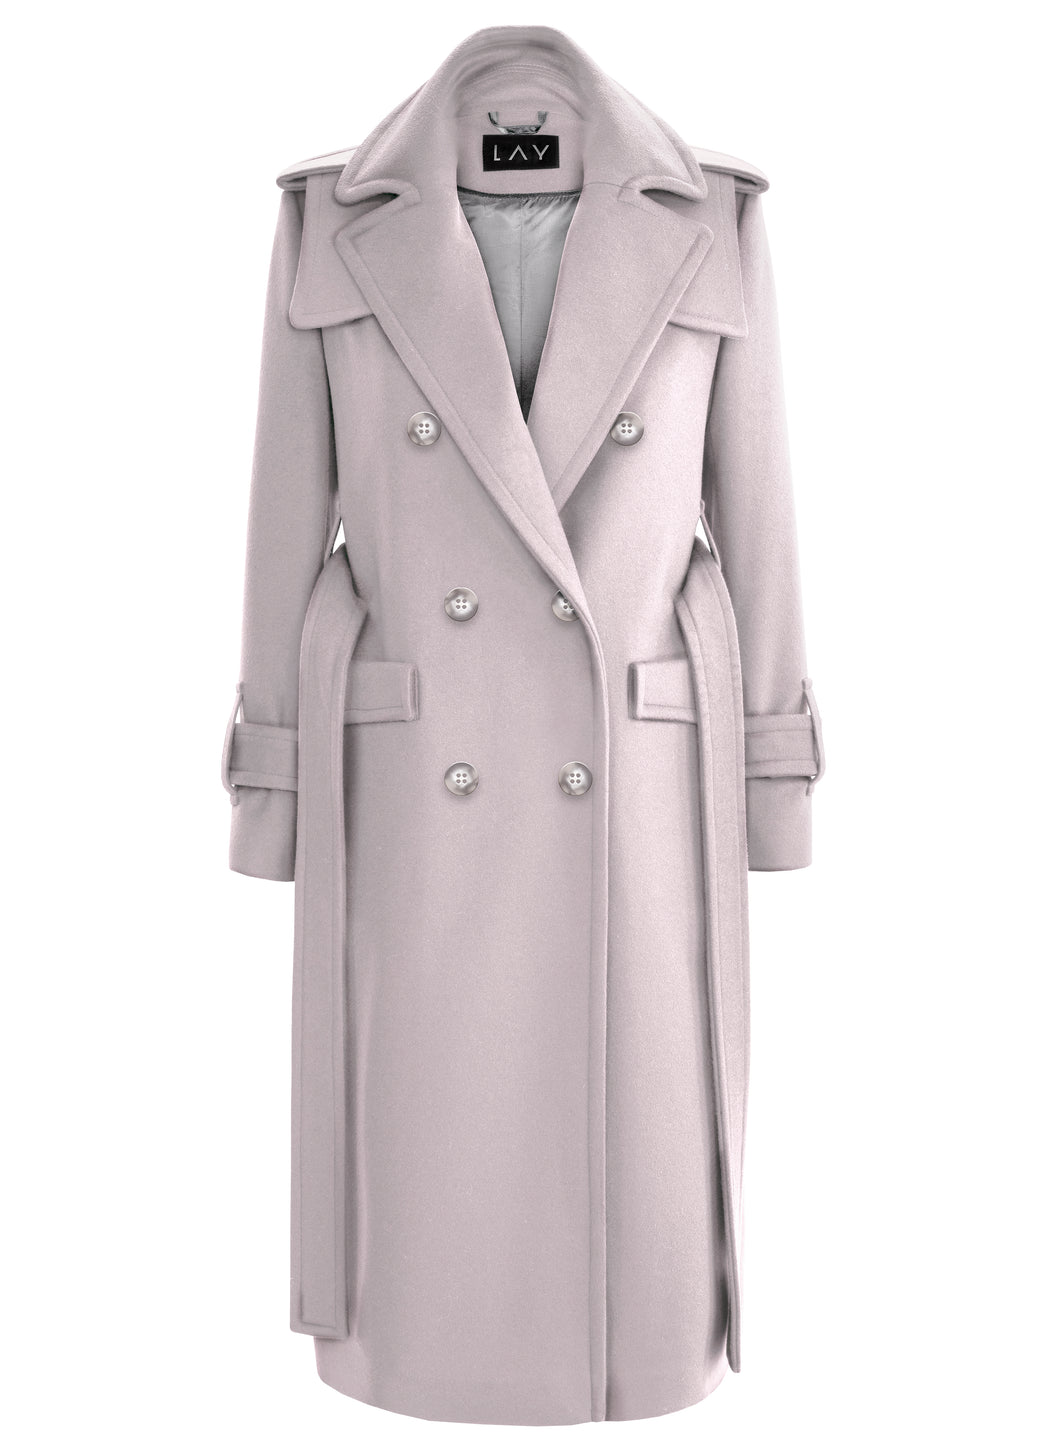 ARCTIC ROSE WOOL TRENCH 22 SALE